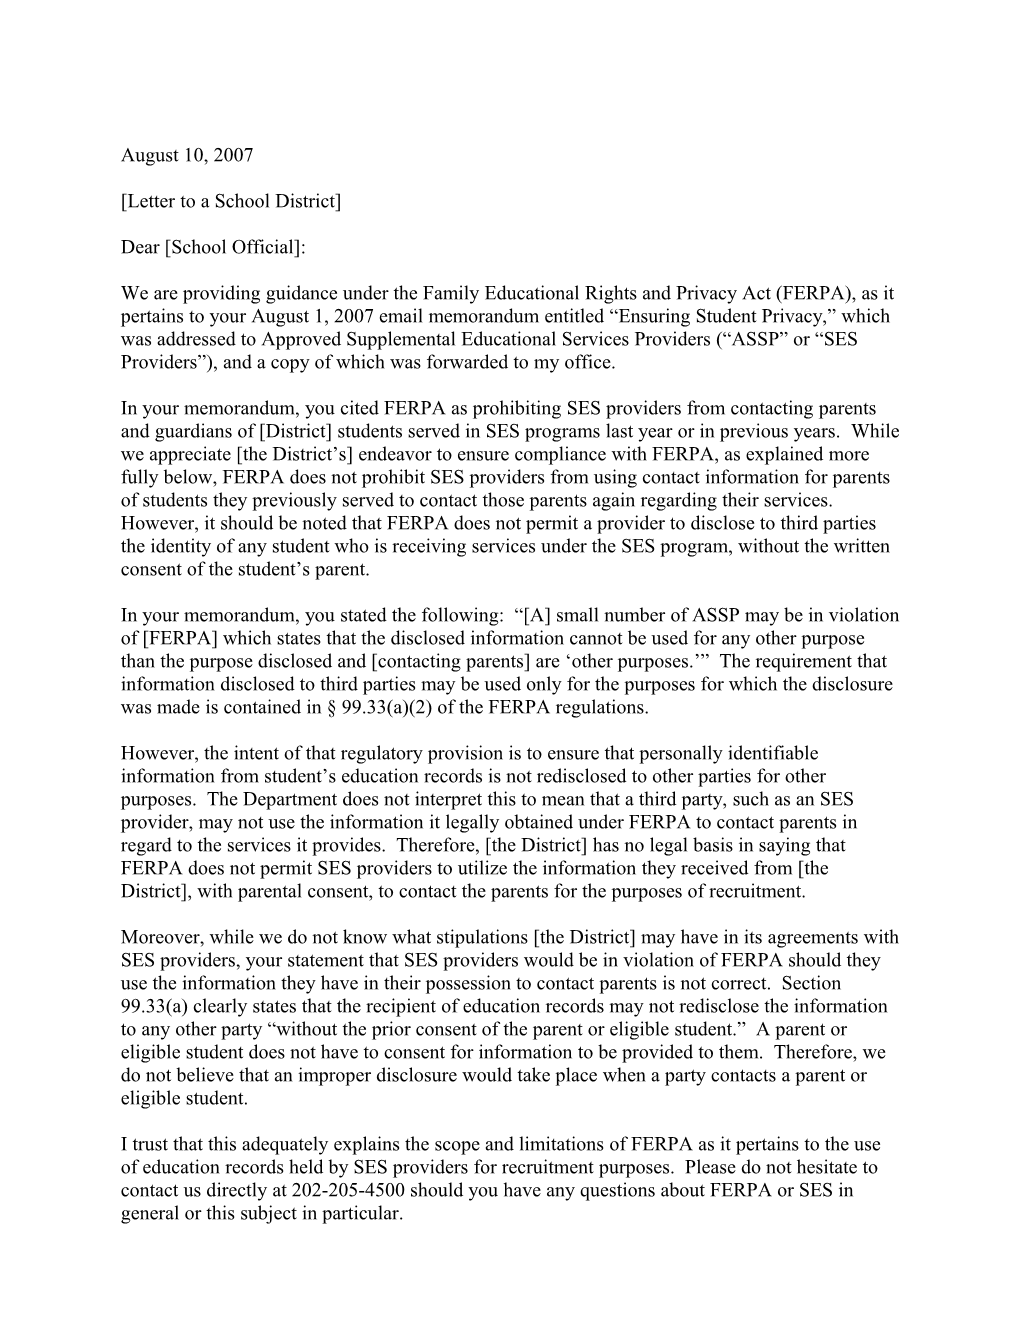 Letter to School District Re:SES Providers Contacting Parents 8/9/07 (MS Word)